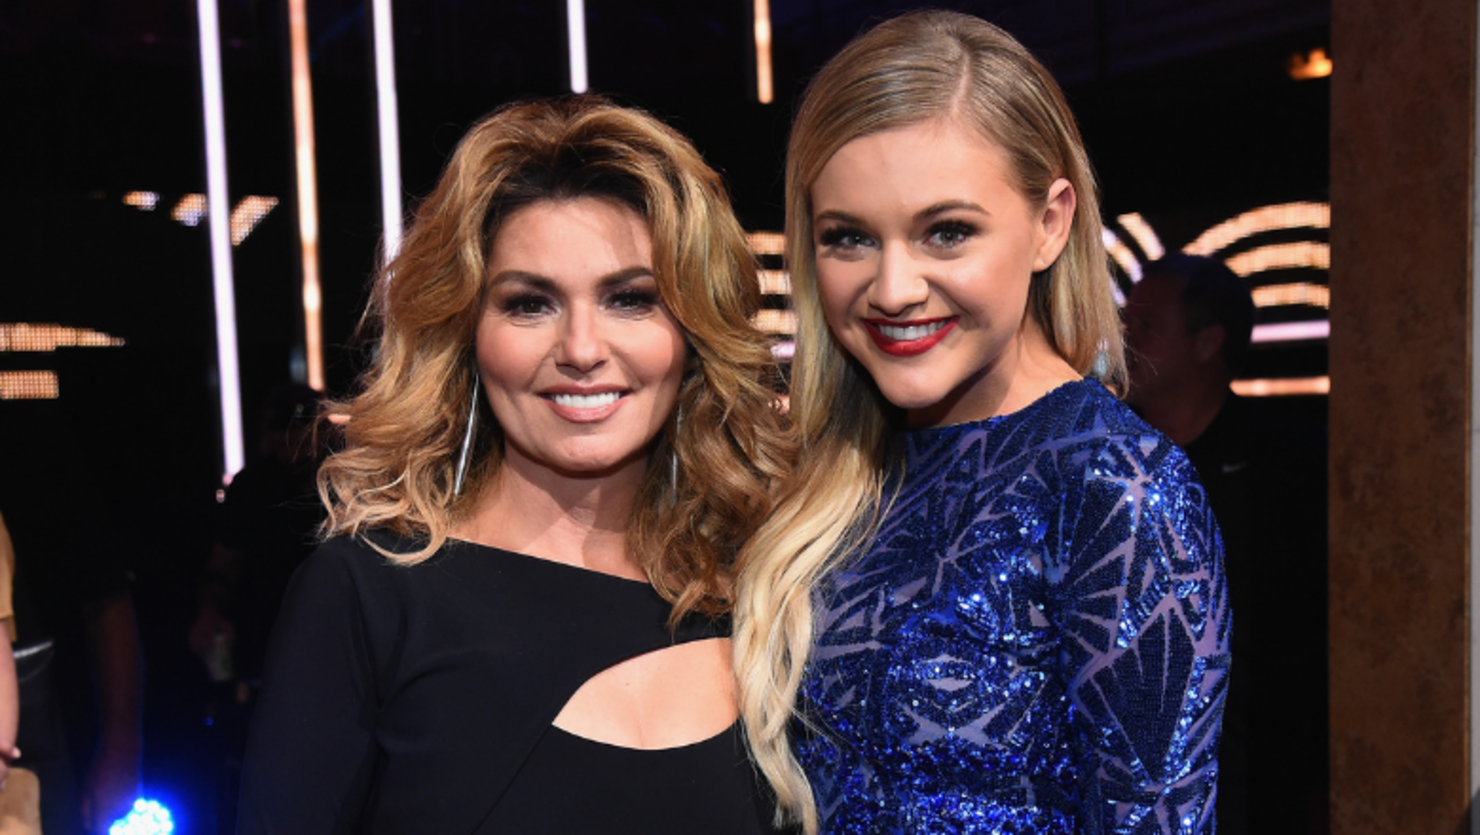 Shania Twain Joins Kelsea Ballerini For 'Hole In The Bottle' Remix